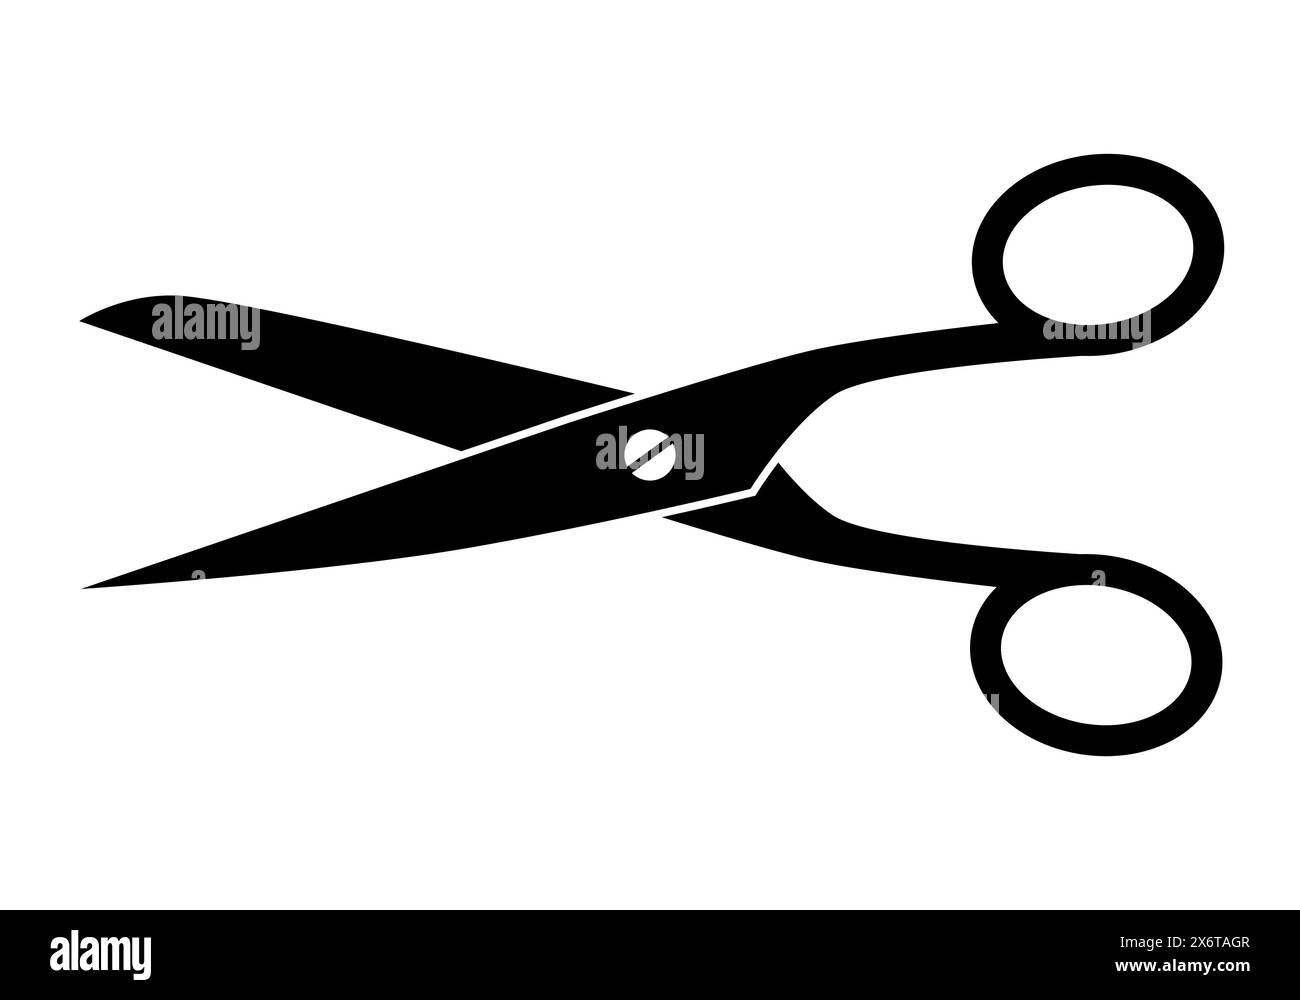 scissors silhouette shape, black and white vector illustration of hand-operated shearing tools Stock Vector